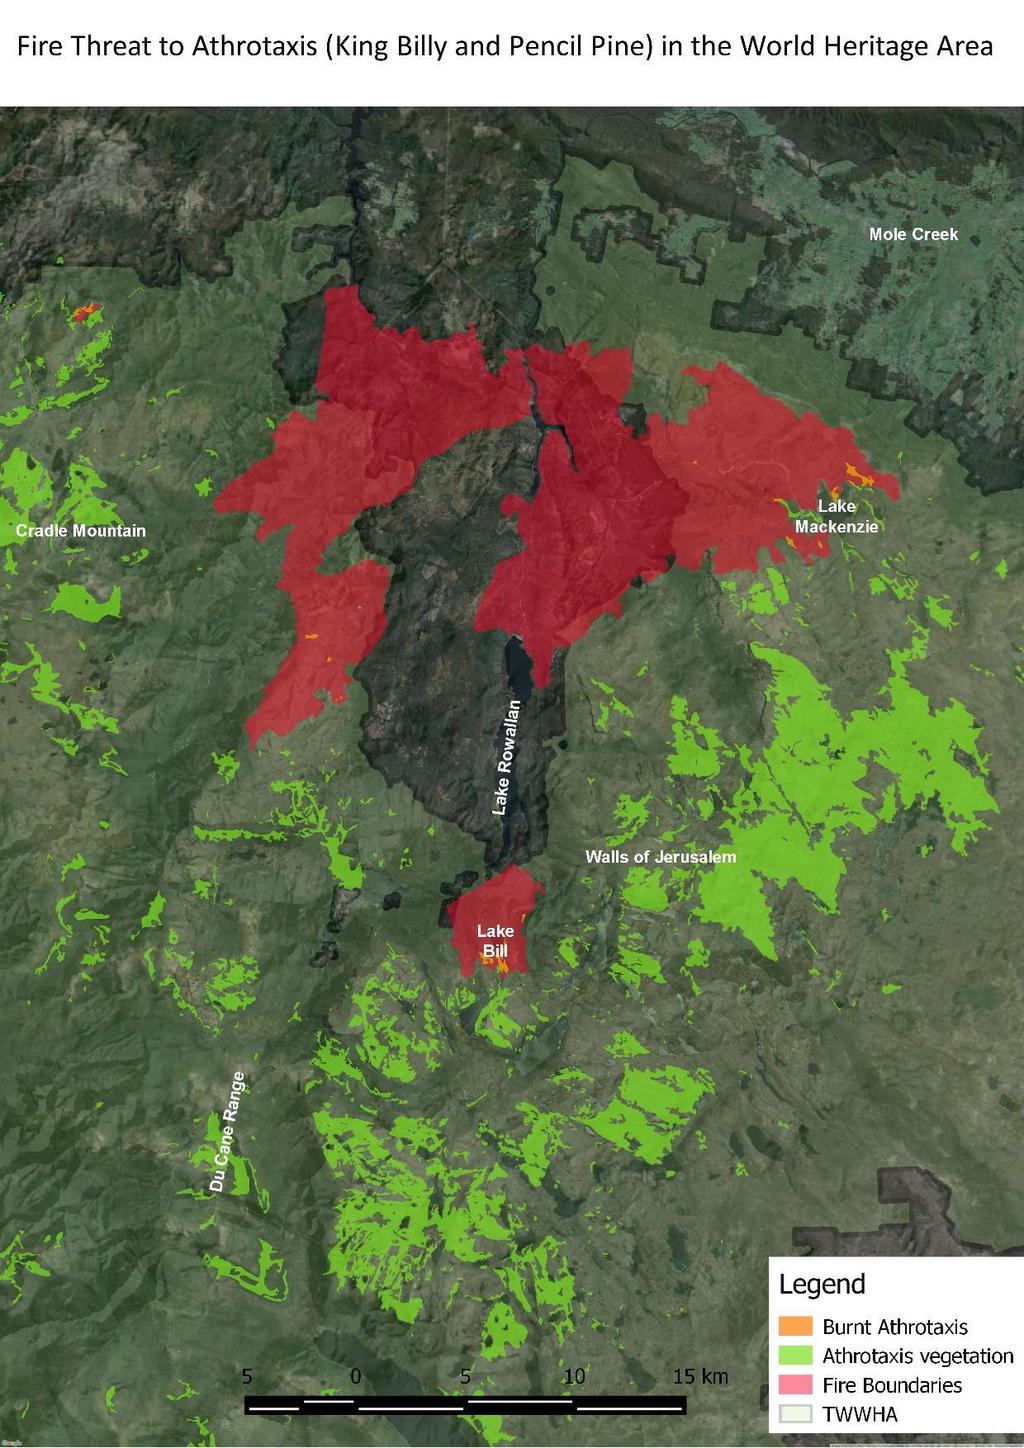 This map shows the proximity of current fires to vulnerable Athrotaxis vegetation within the Tasmanian Wilderness World